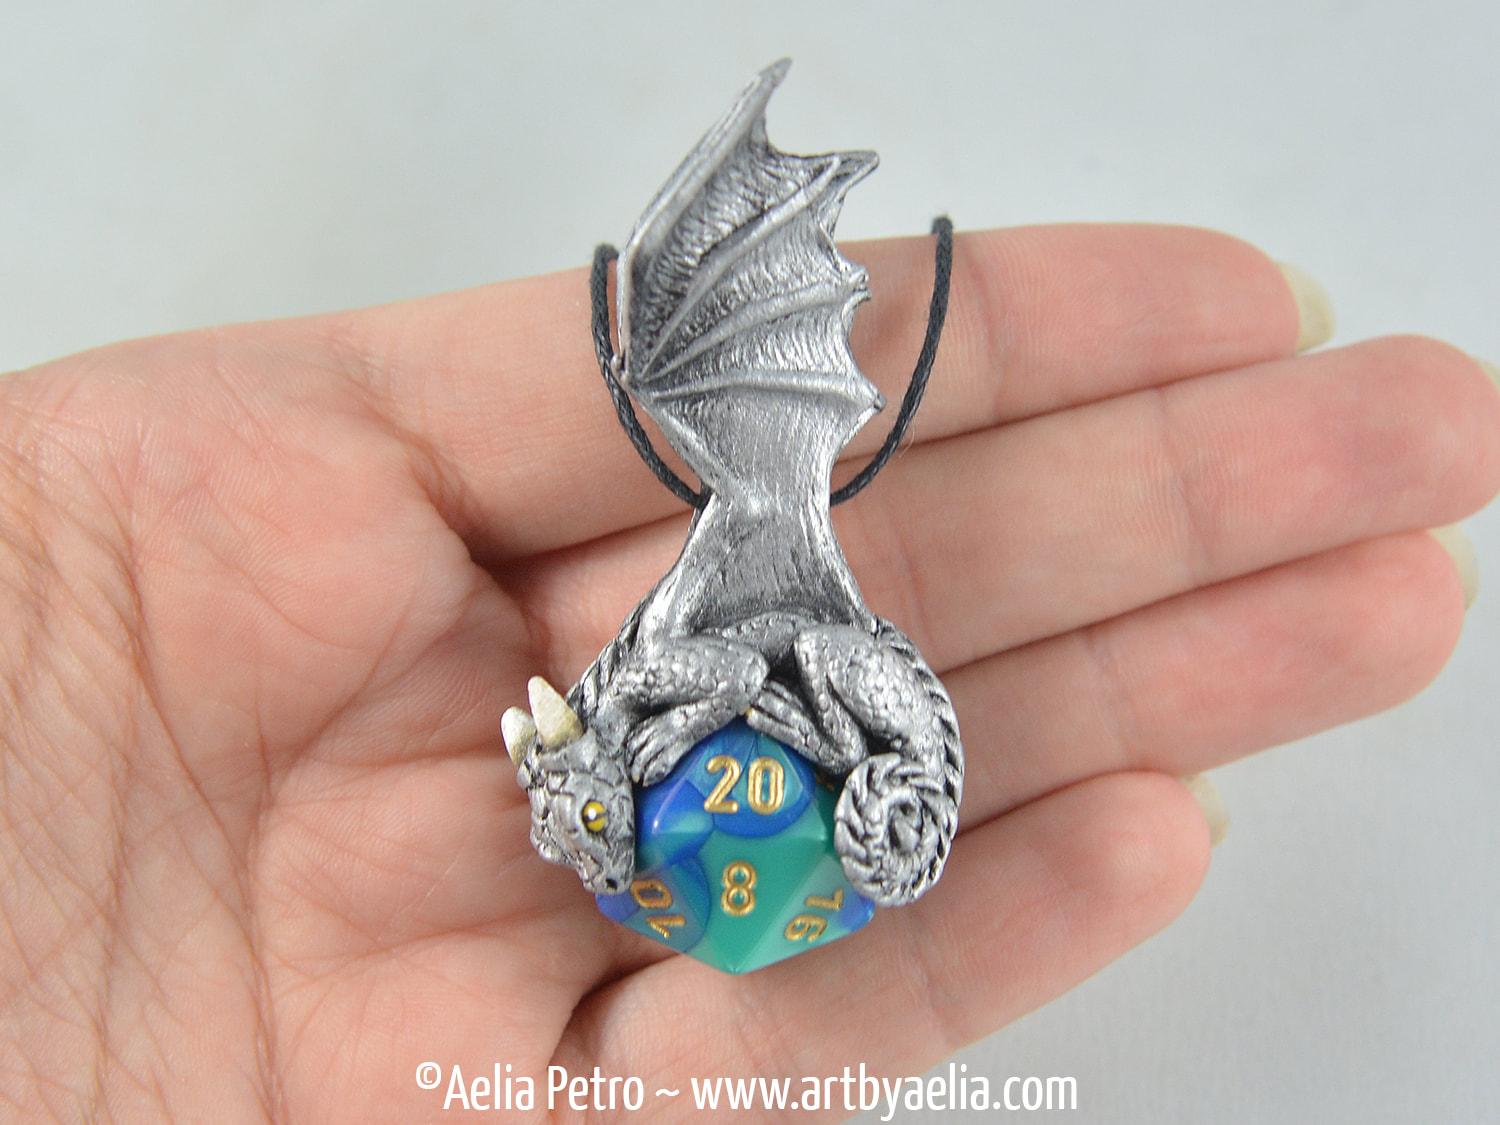 Personalized Name D20 Dice Dragon Necklace